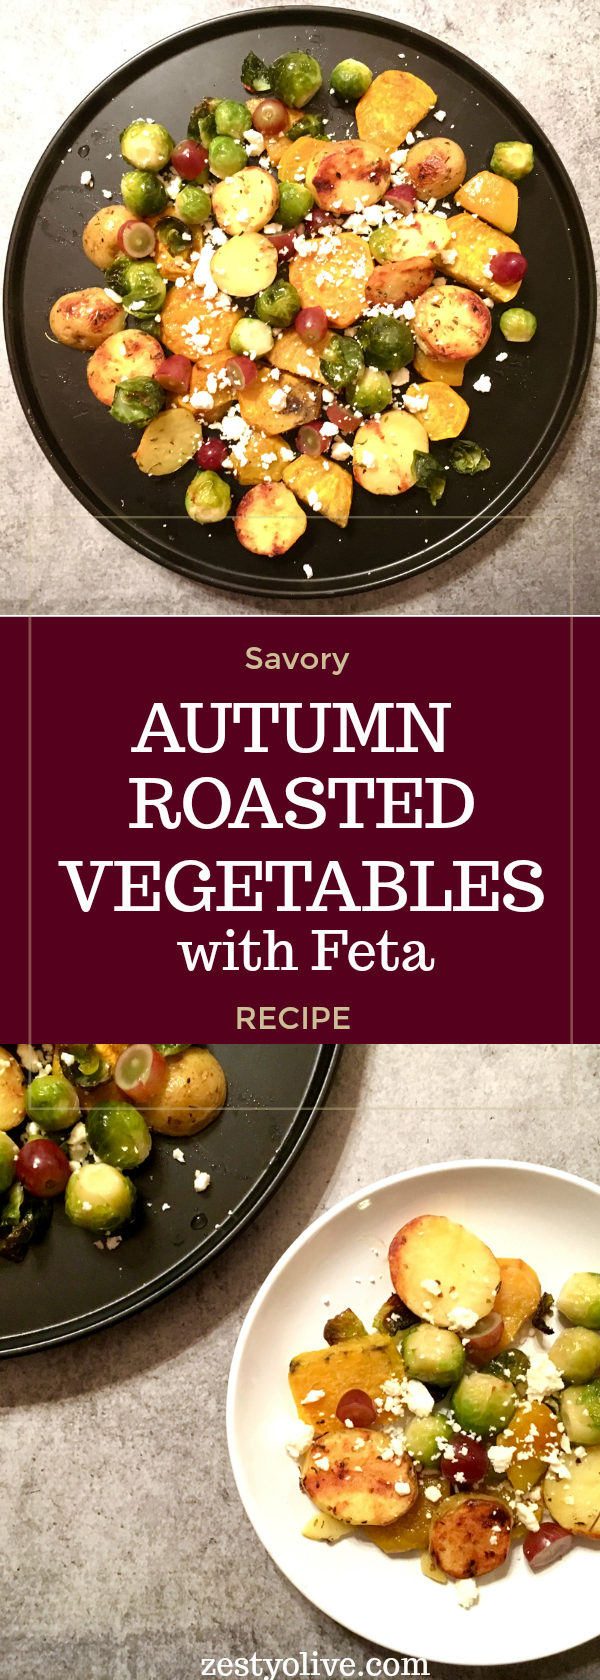 Autumn Roasted Vegetables with Feta Cheese and Red Grapes makes a beautiful warm salad or side item. It’s easy, healthy, naturally gluten-free and tastes amazing.